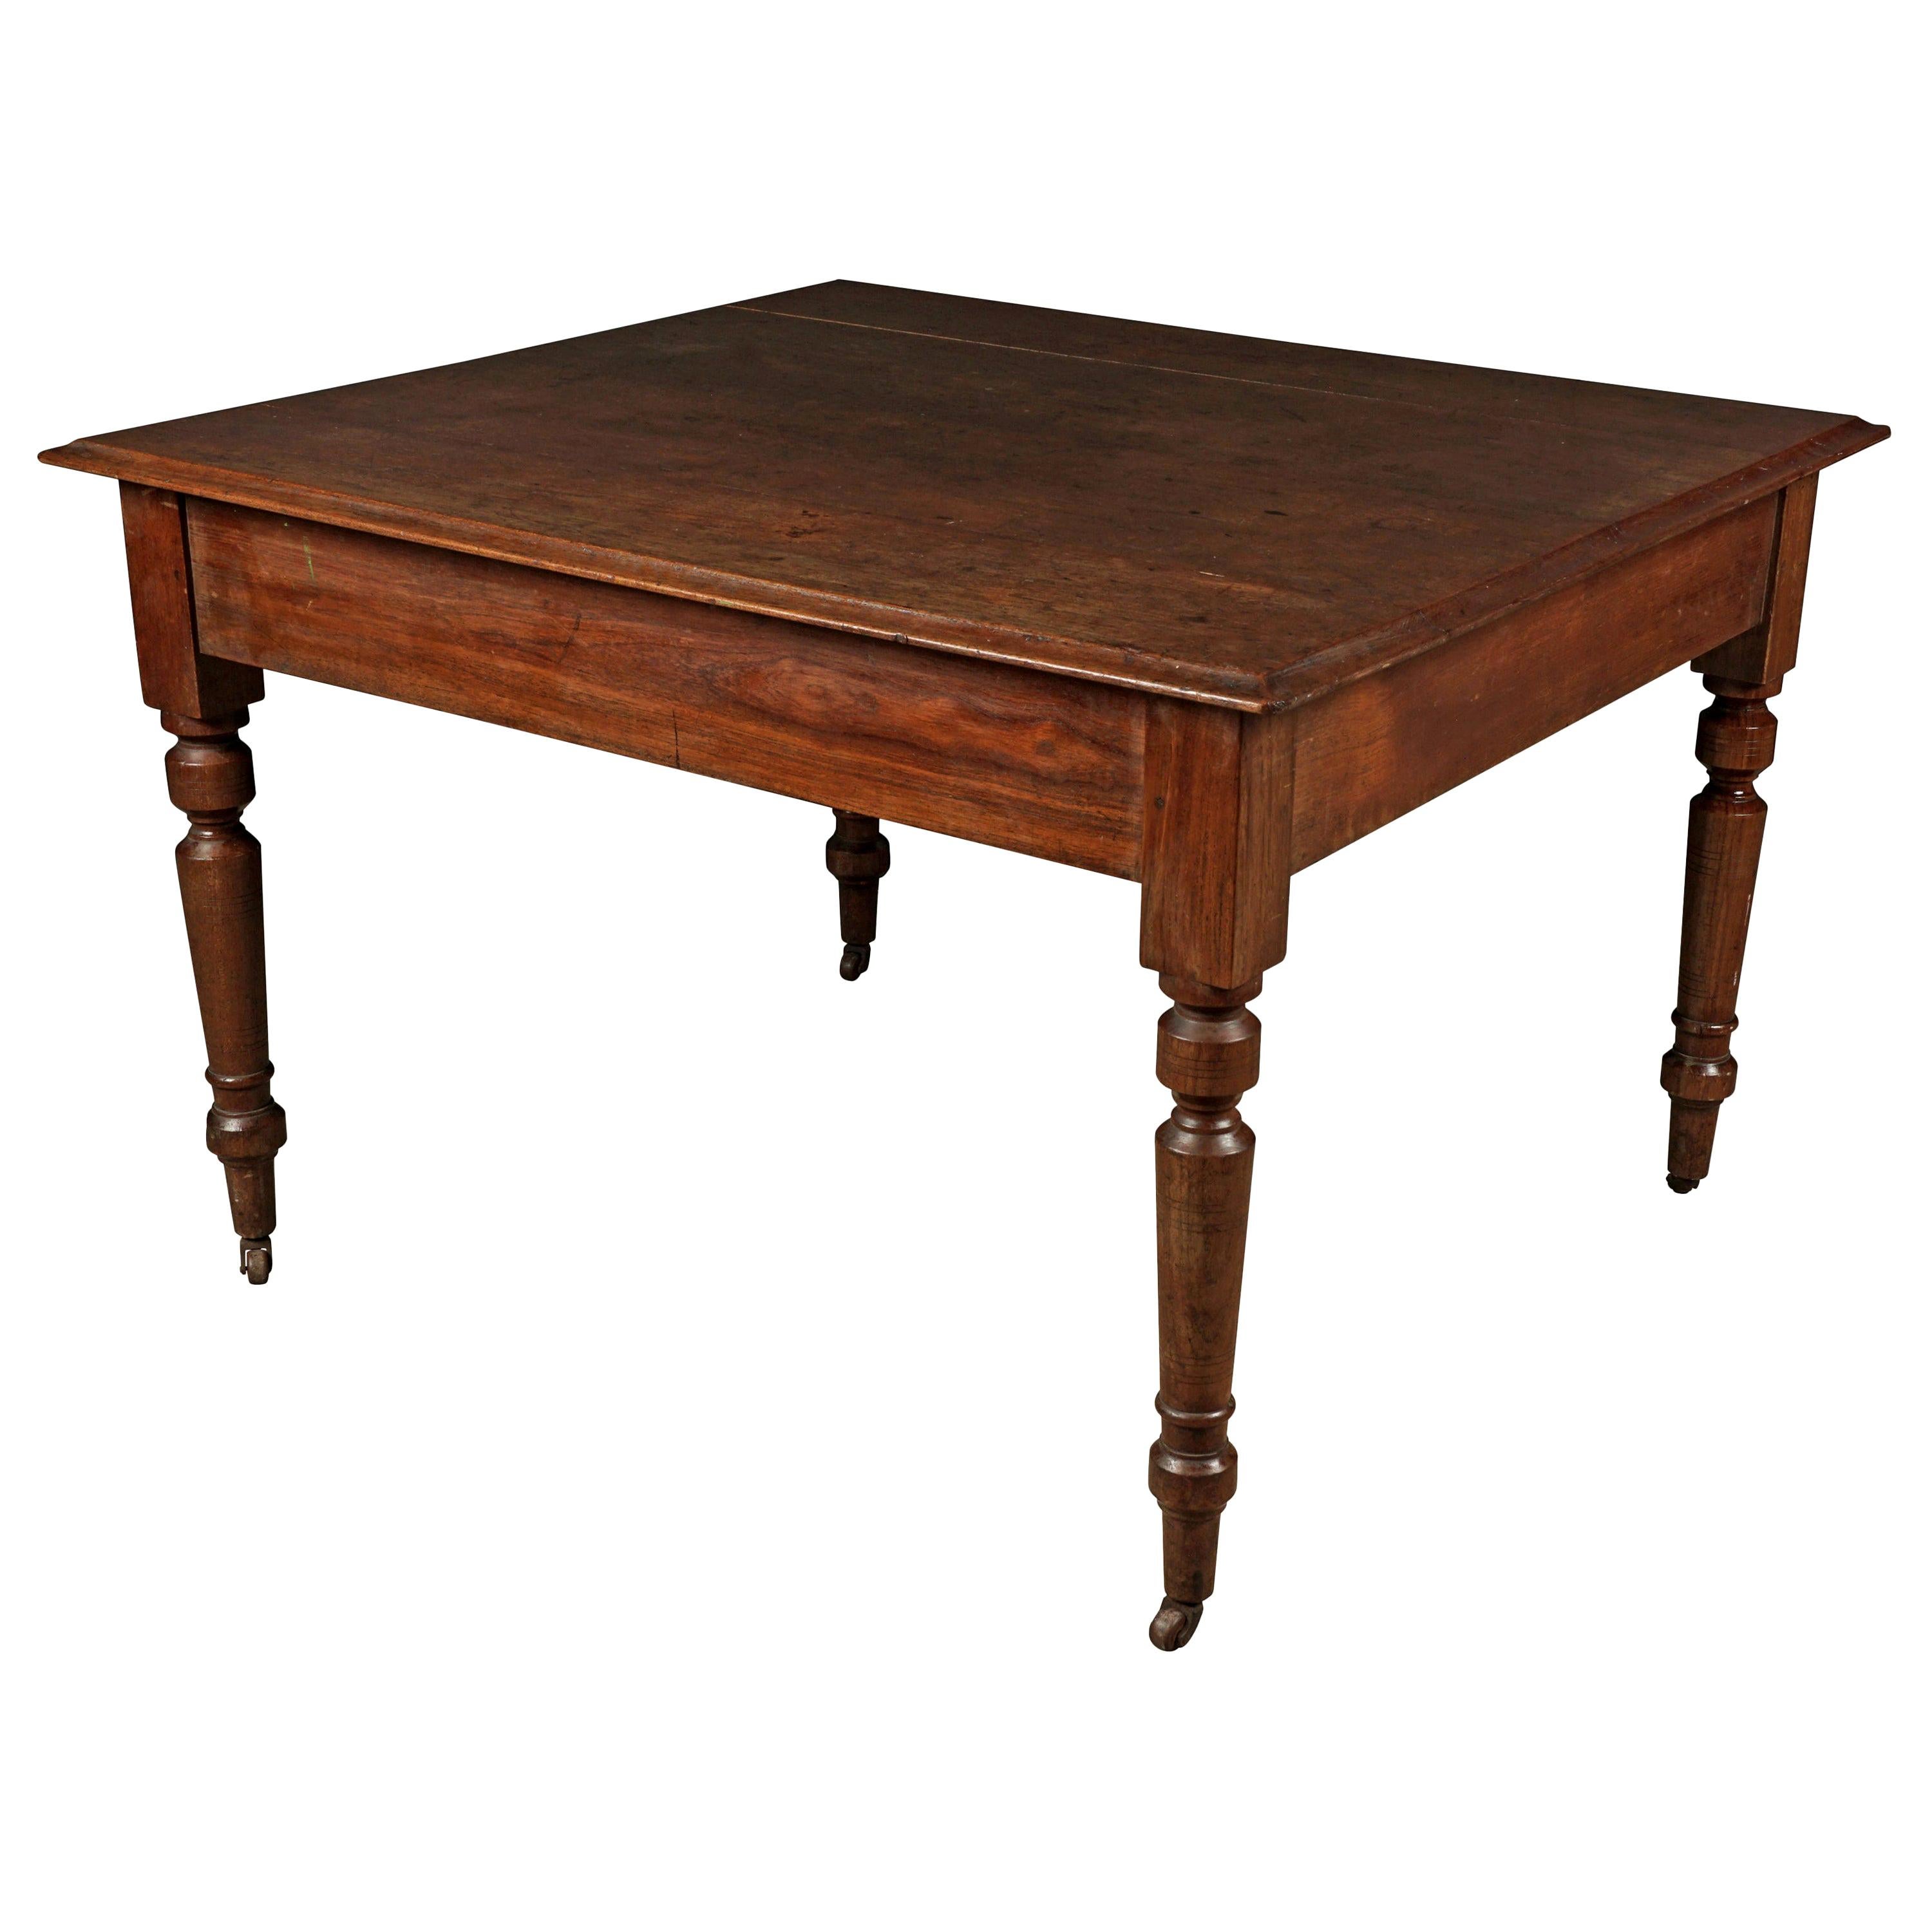 Early Solid Oak Dining Table from France, circa 1920